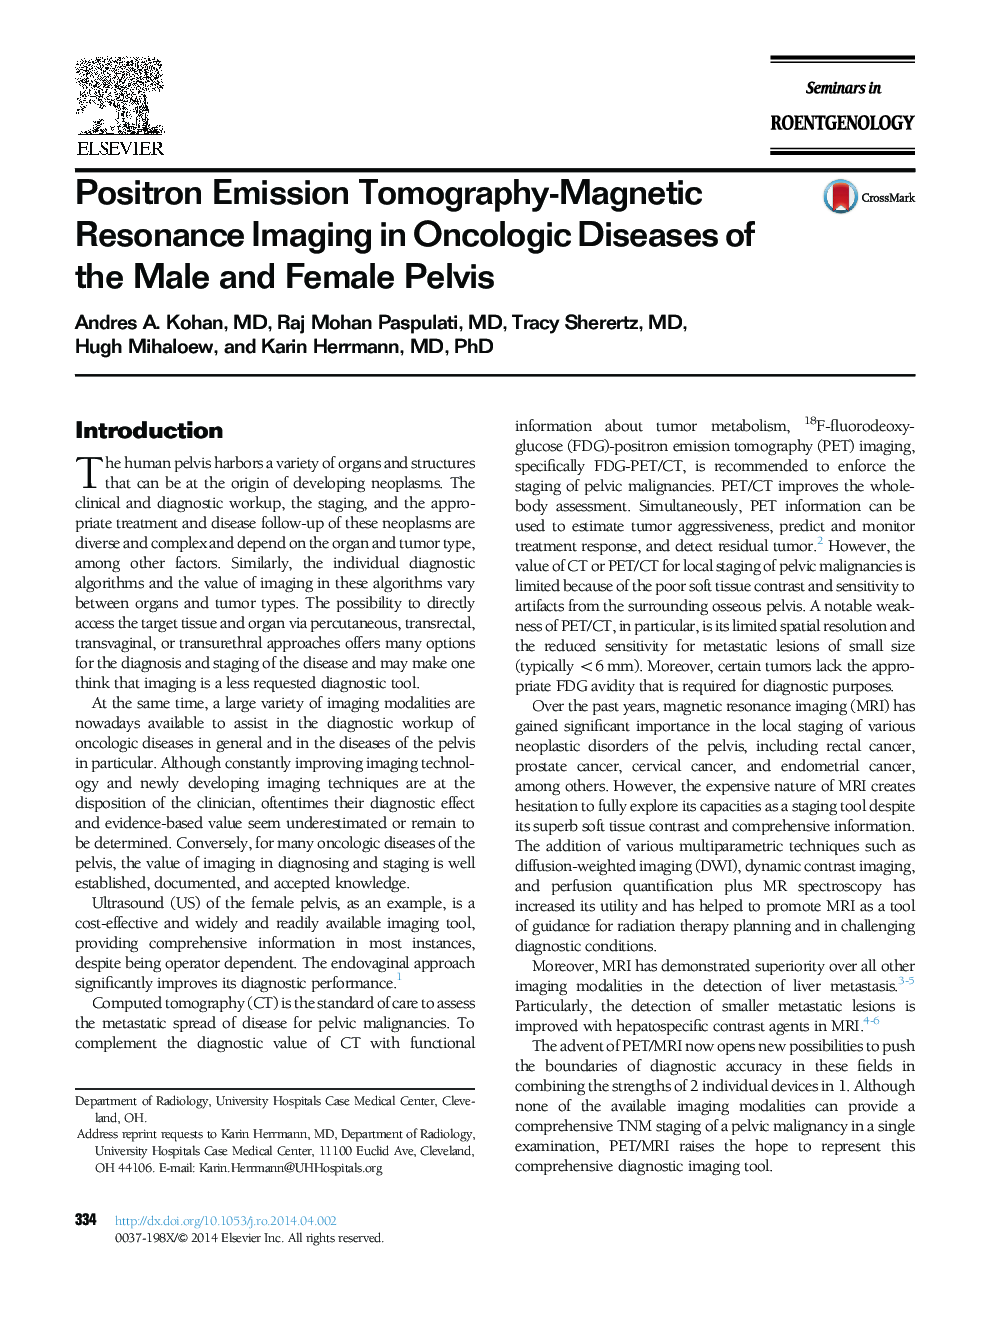 Positron Emission Tomography-Magnetic Resonance Imaging in Oncologic Diseases of the Male and Female Pelvis